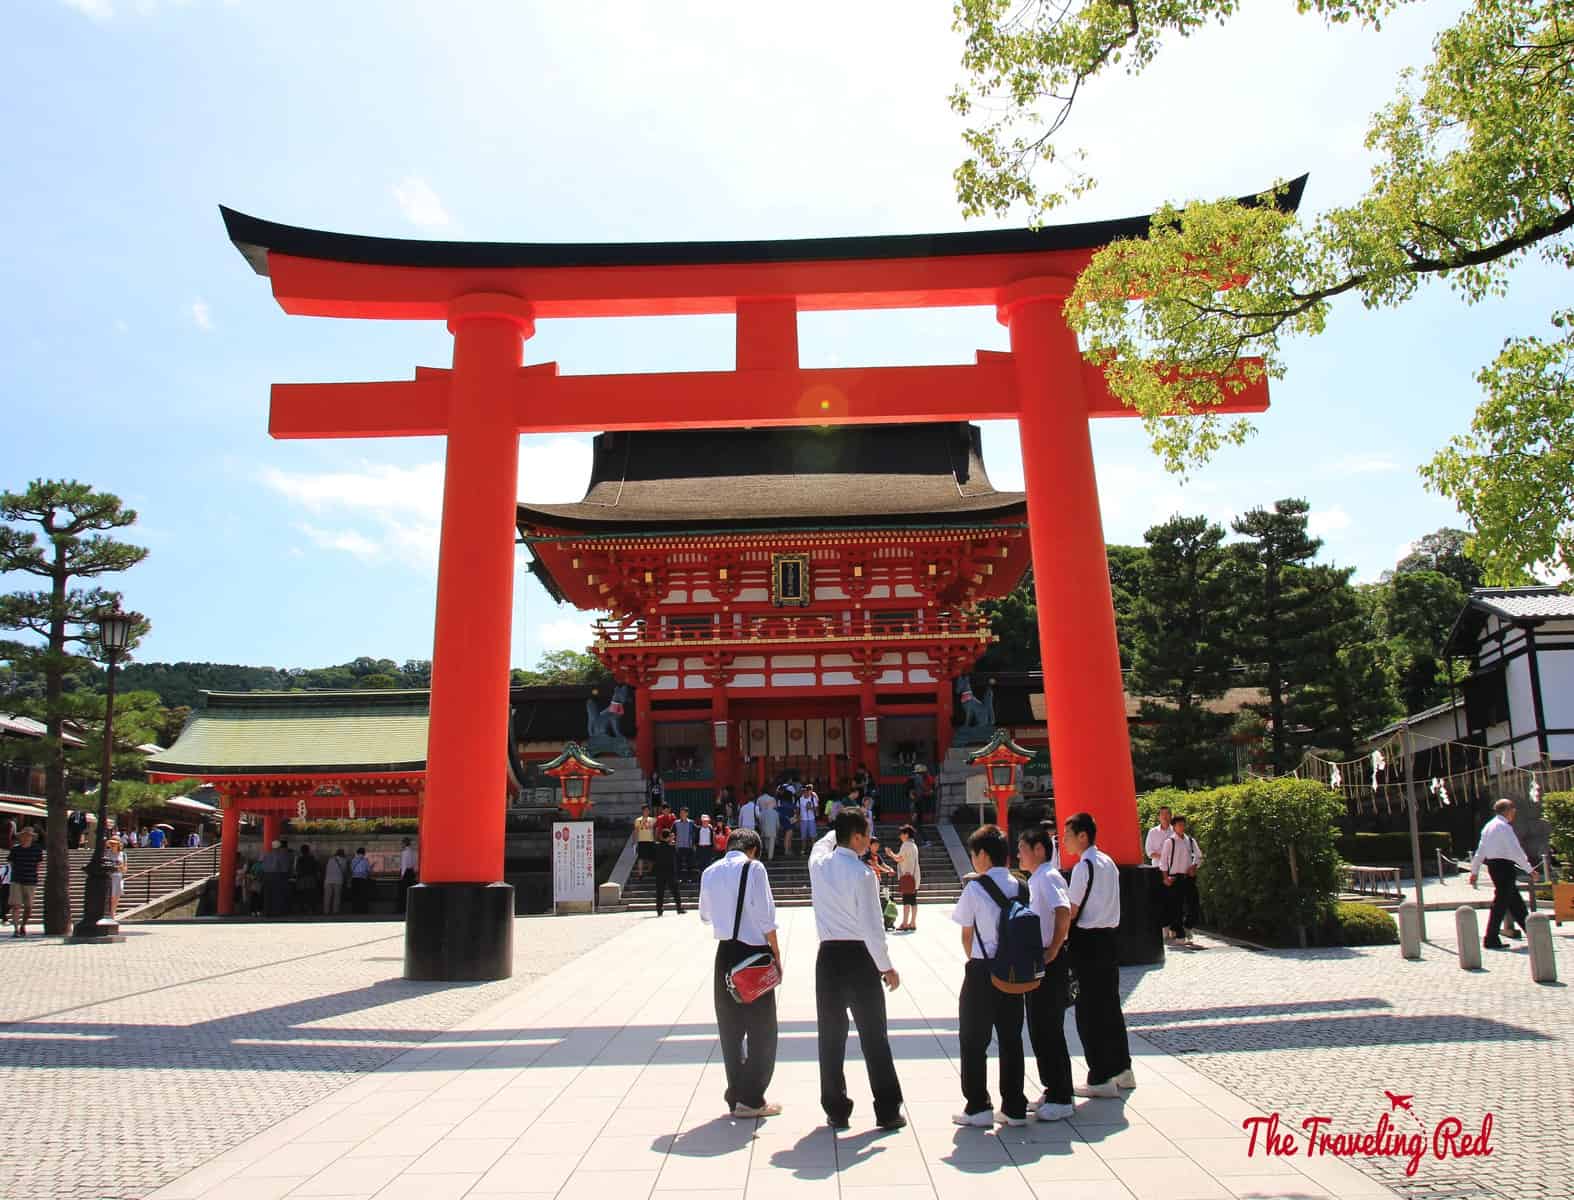 When in Kyoto you have to visit Fushimi Inari Shrine. It’s famous in Japan for the pathway of orange torii gates. They say that over 10,000 torii gates create the pathway, which is 2.5-miles long, going uphill through the woods.